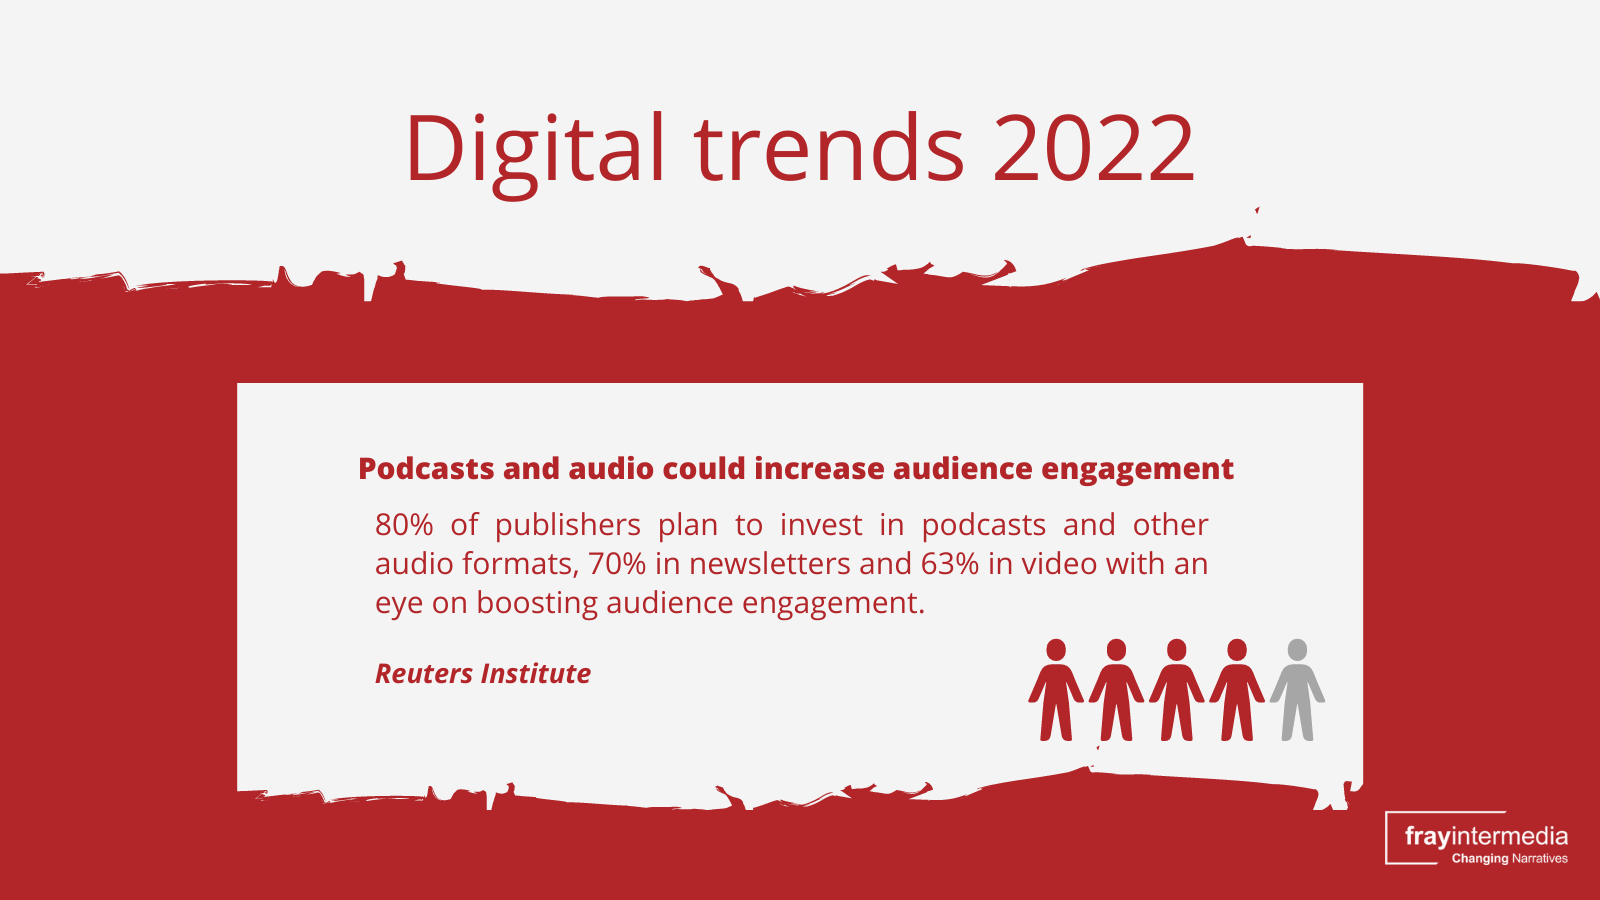 Podcasts and audio could increase audience engagement